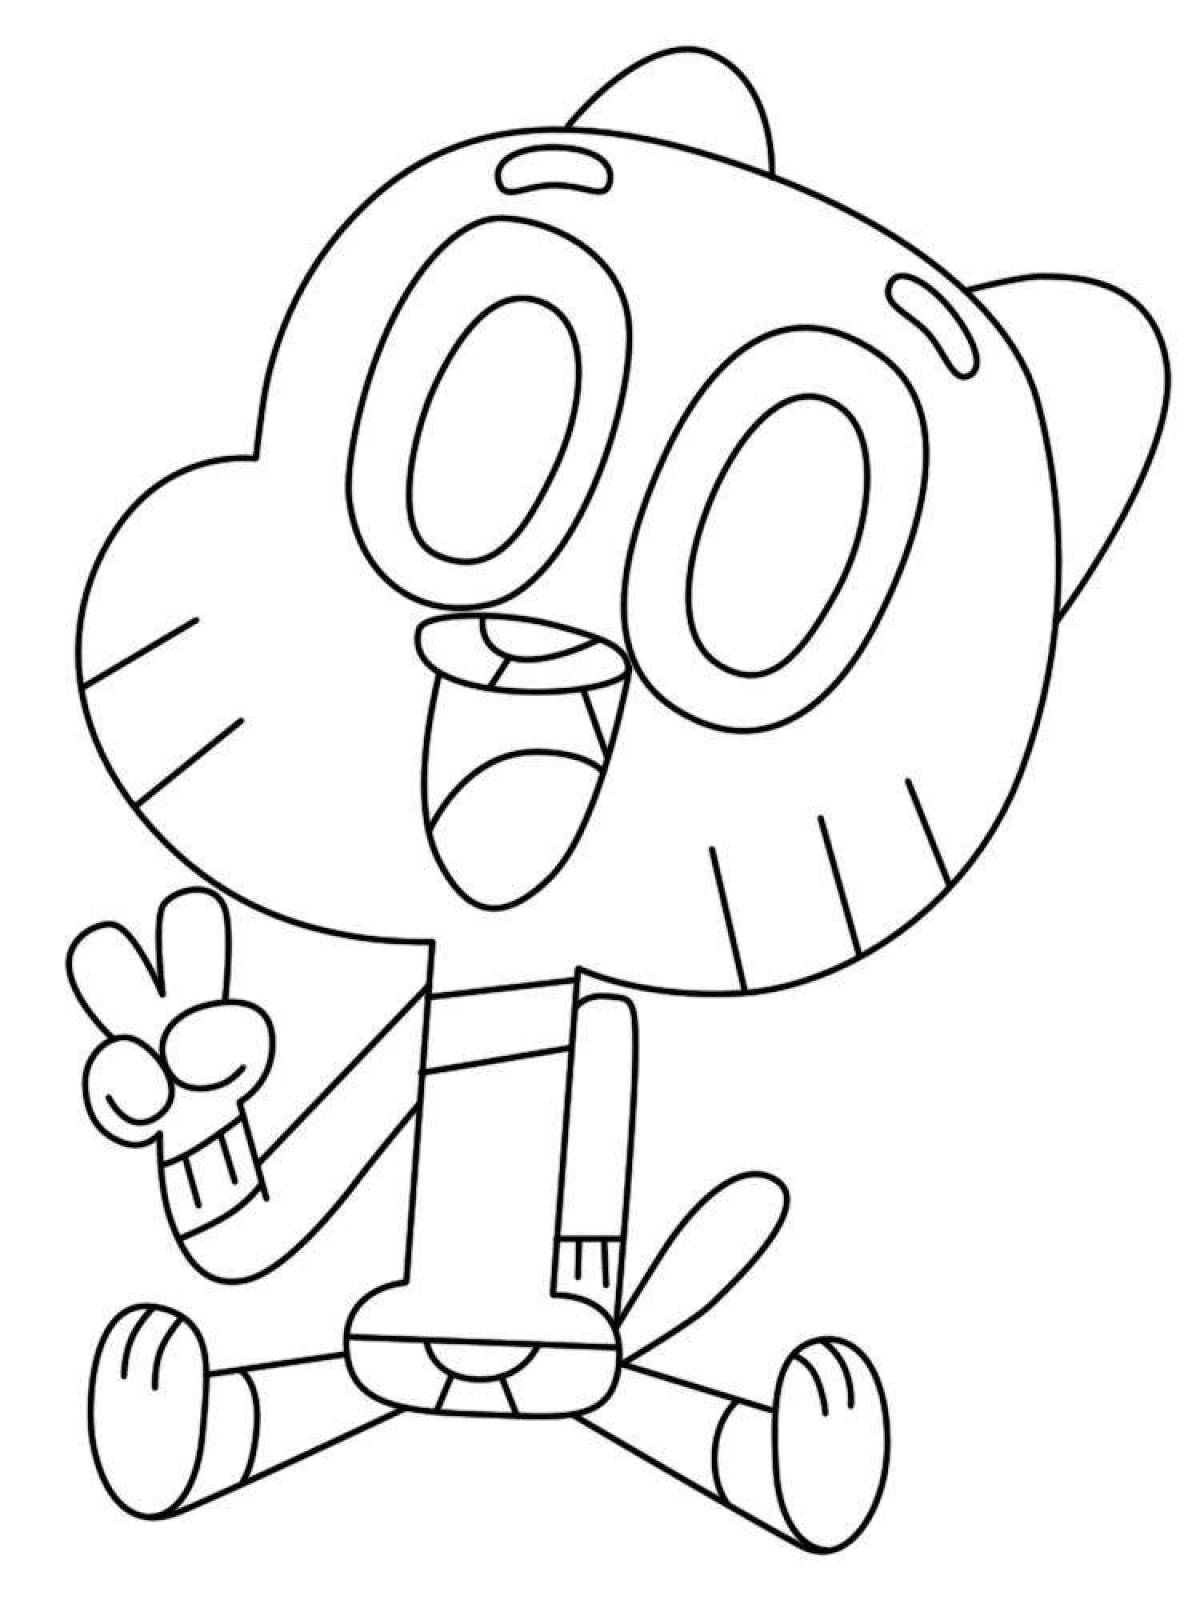 The Amazing World of Gumball fun coloring book